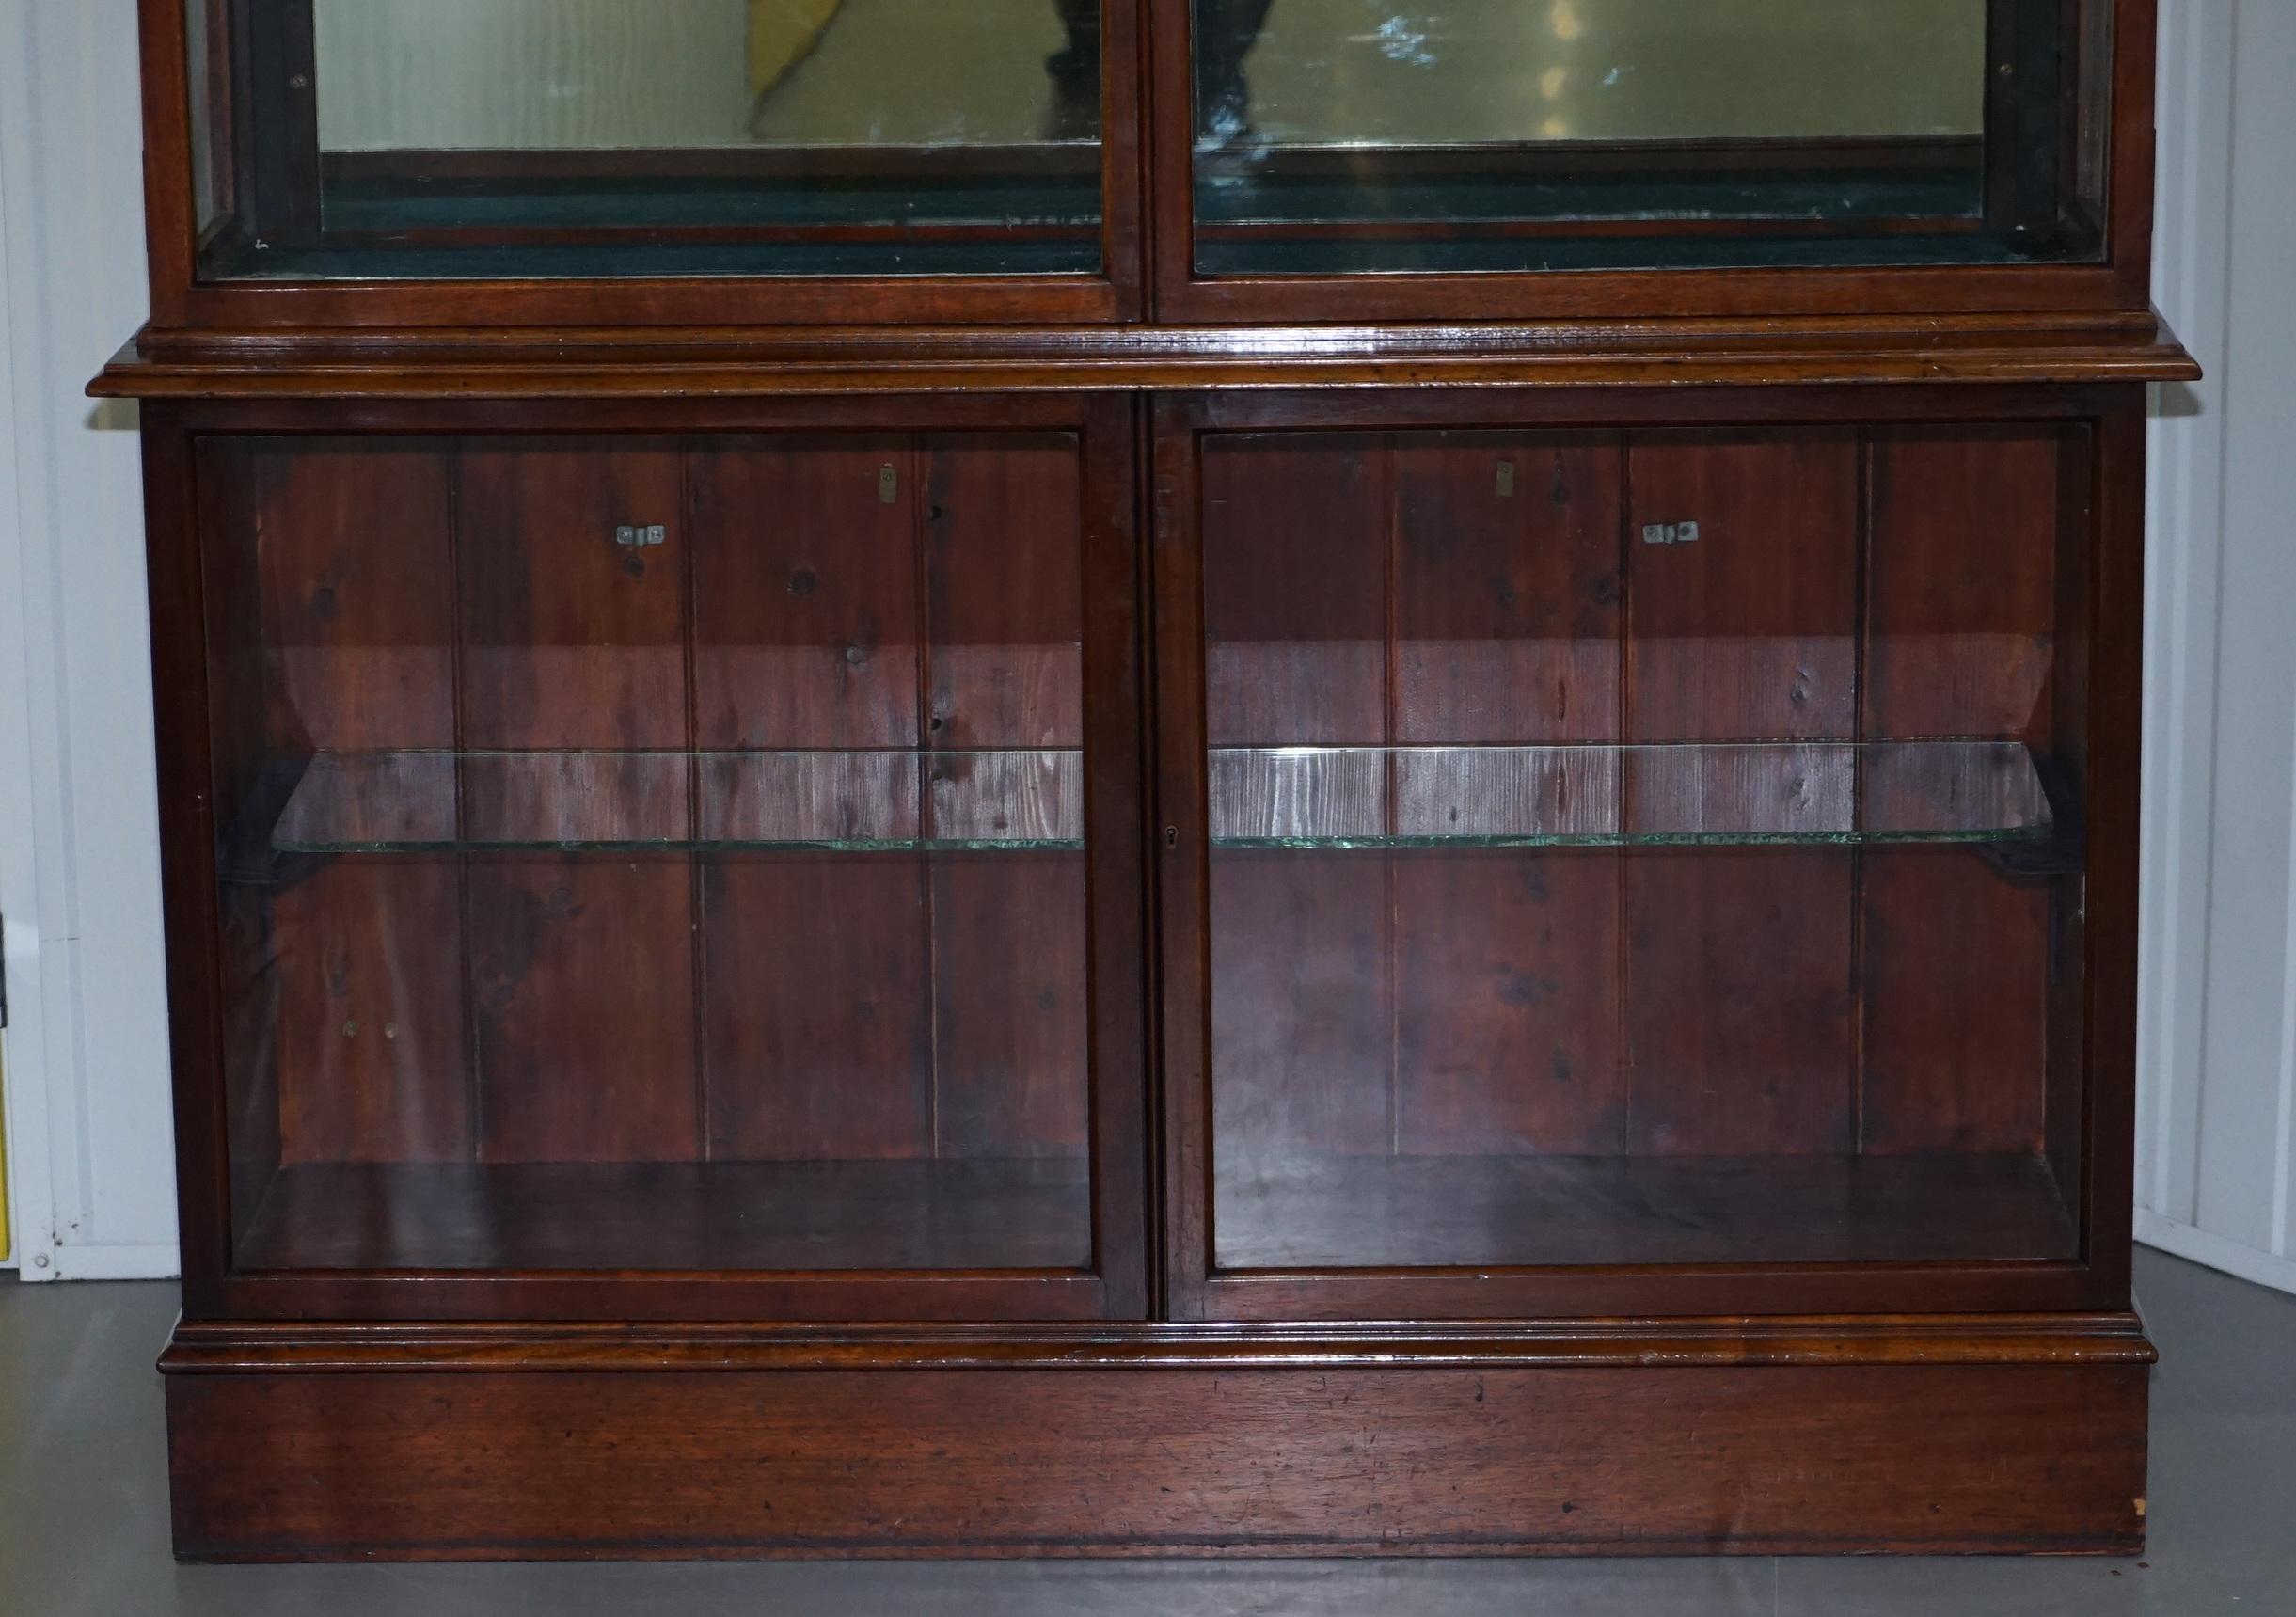 English Rare Victorian Haberdashery Apothecary Shops Cabinet Fully Glazed Door Bookcase For Sale